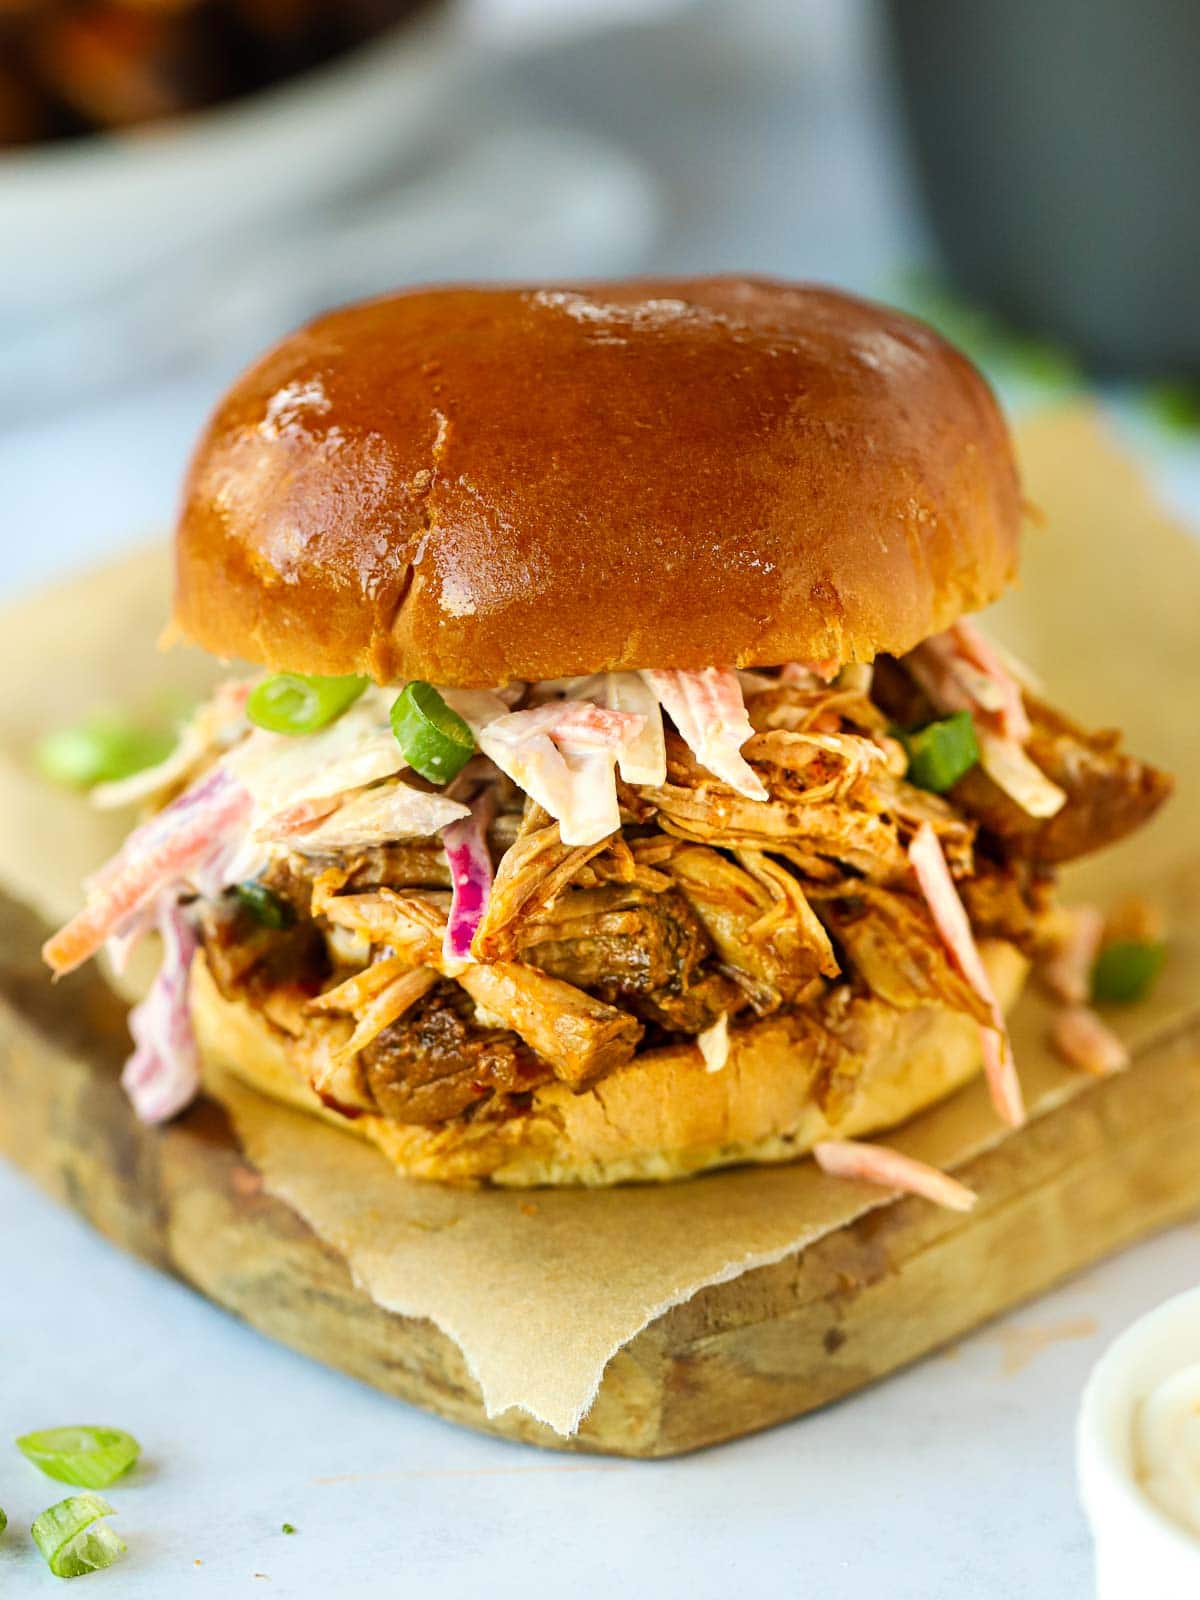 Slow Cooker Pulled Pork served in a bread bun with coleslaw